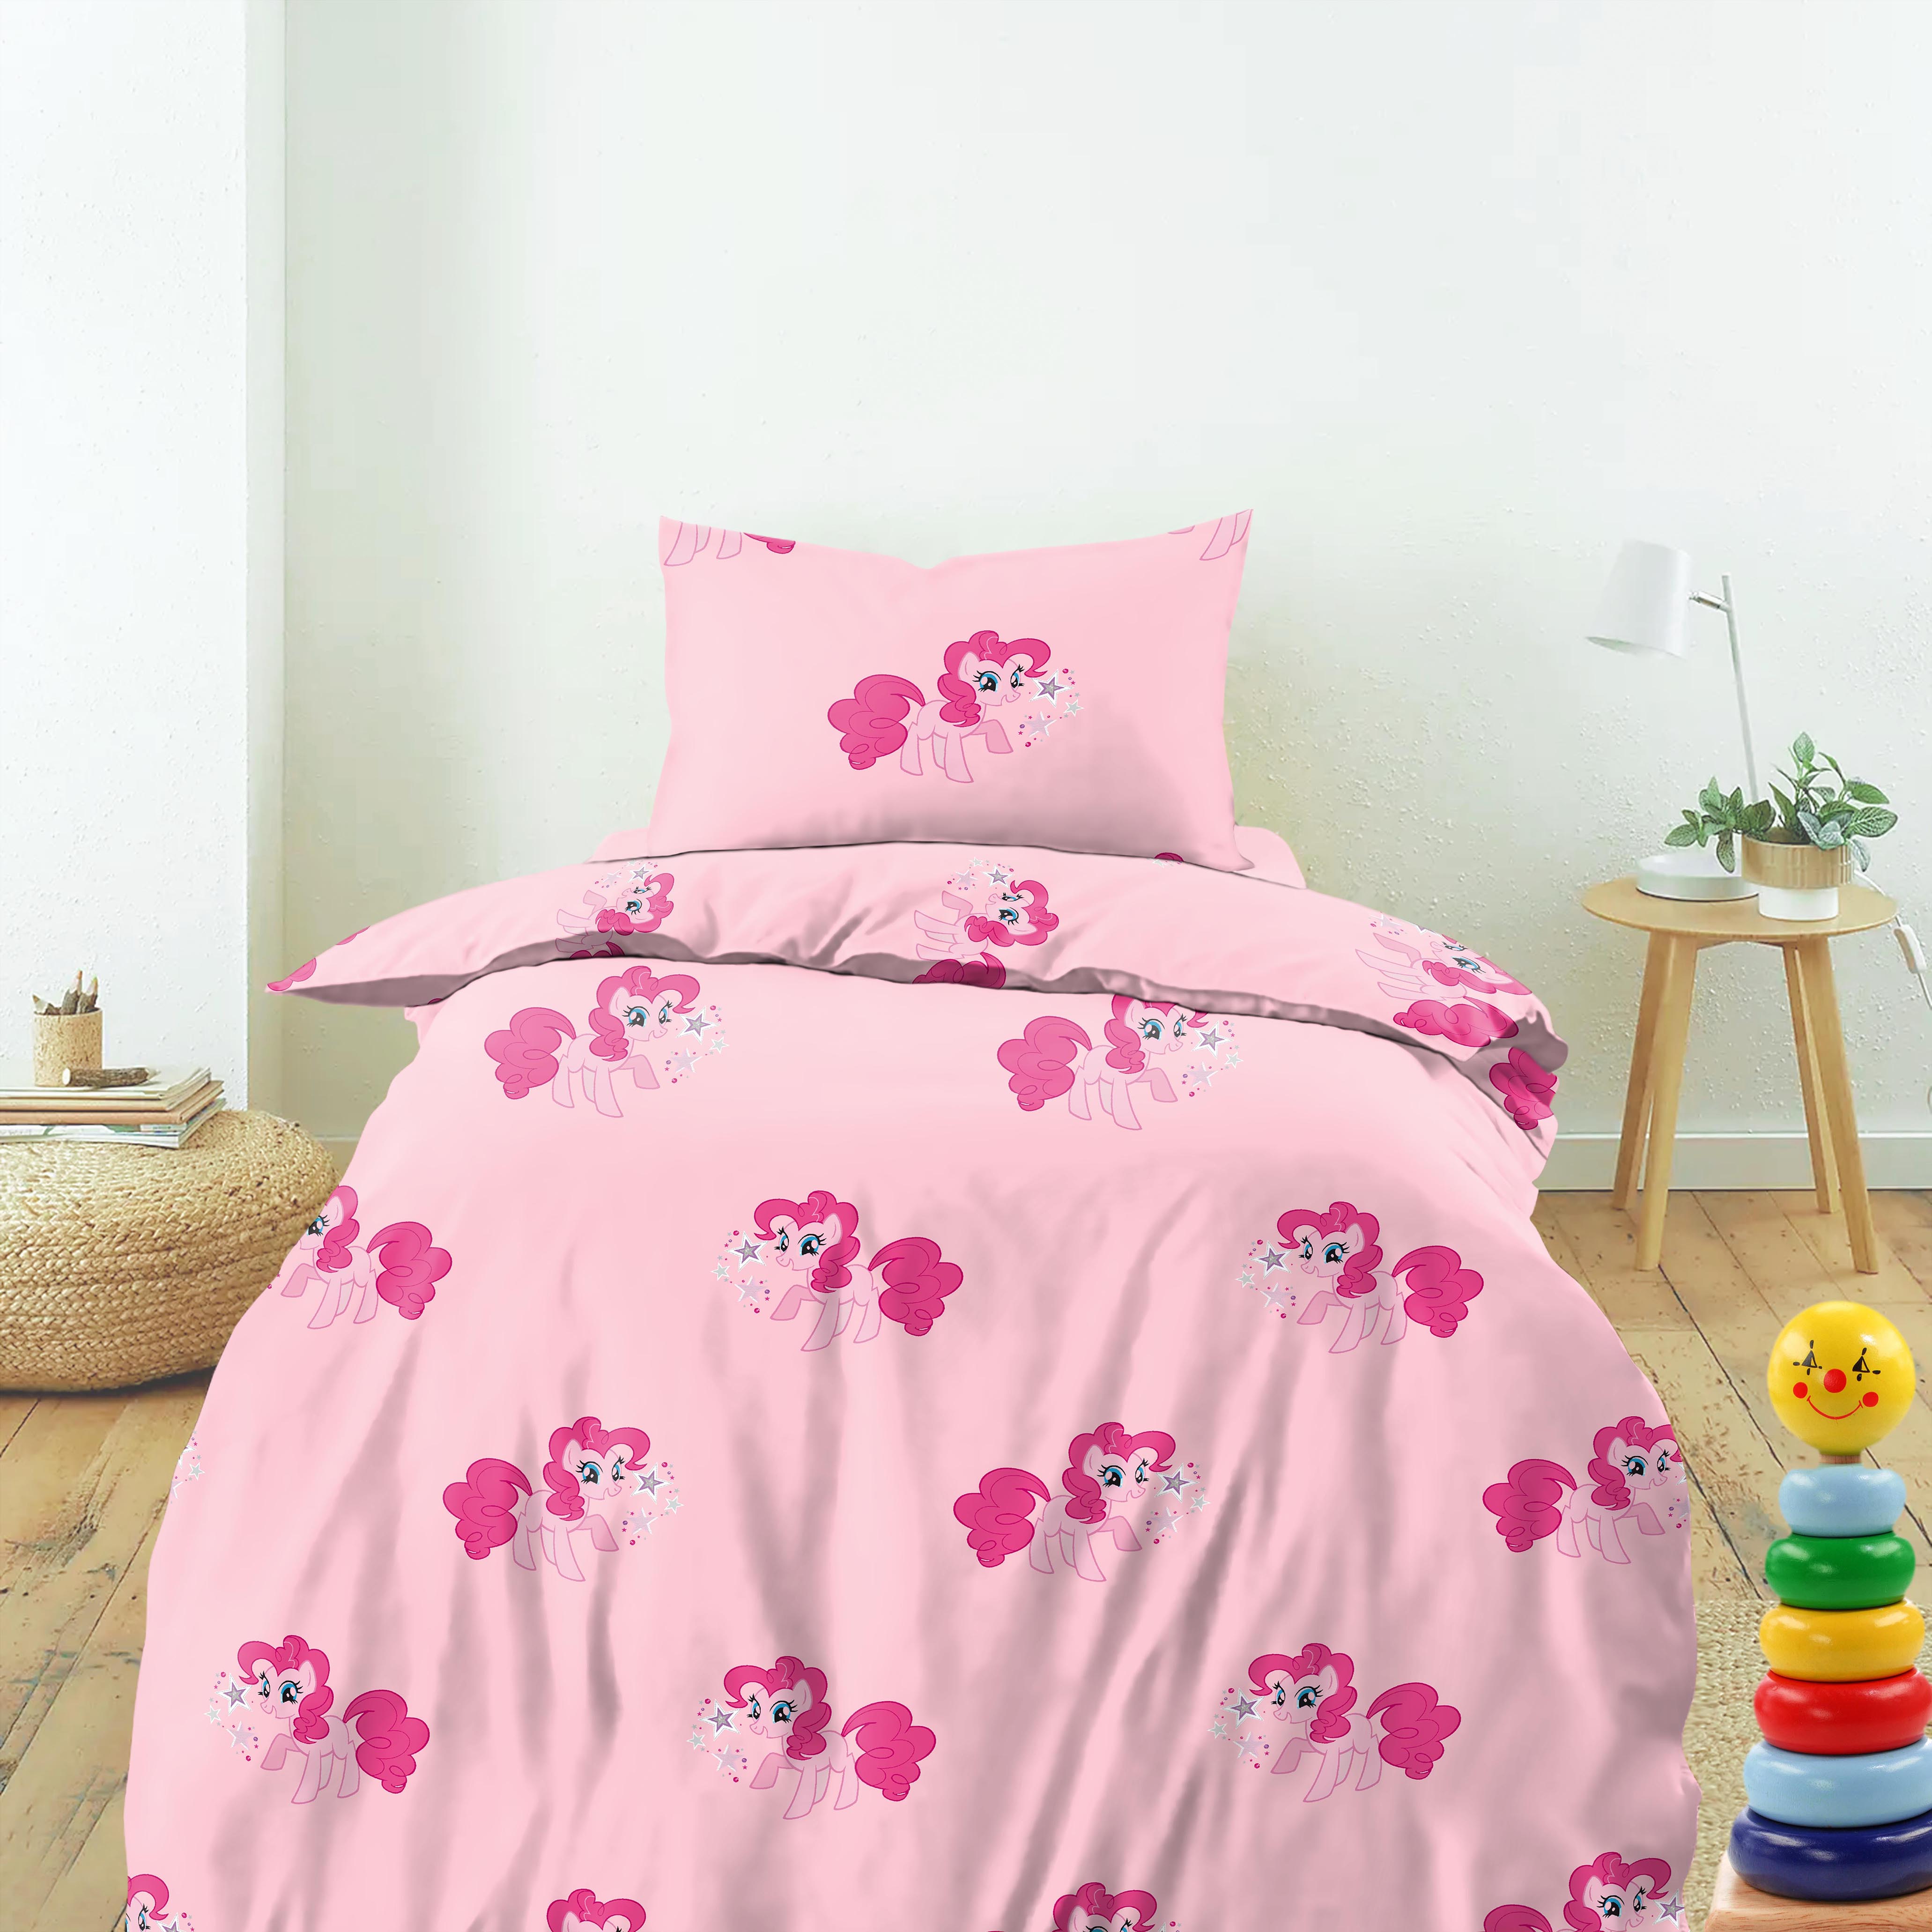 BEDCOVER LITTLE PINK PONY FOR SINGLE BED WITH PILLOW COVERS KING SIZE (60" X 90")